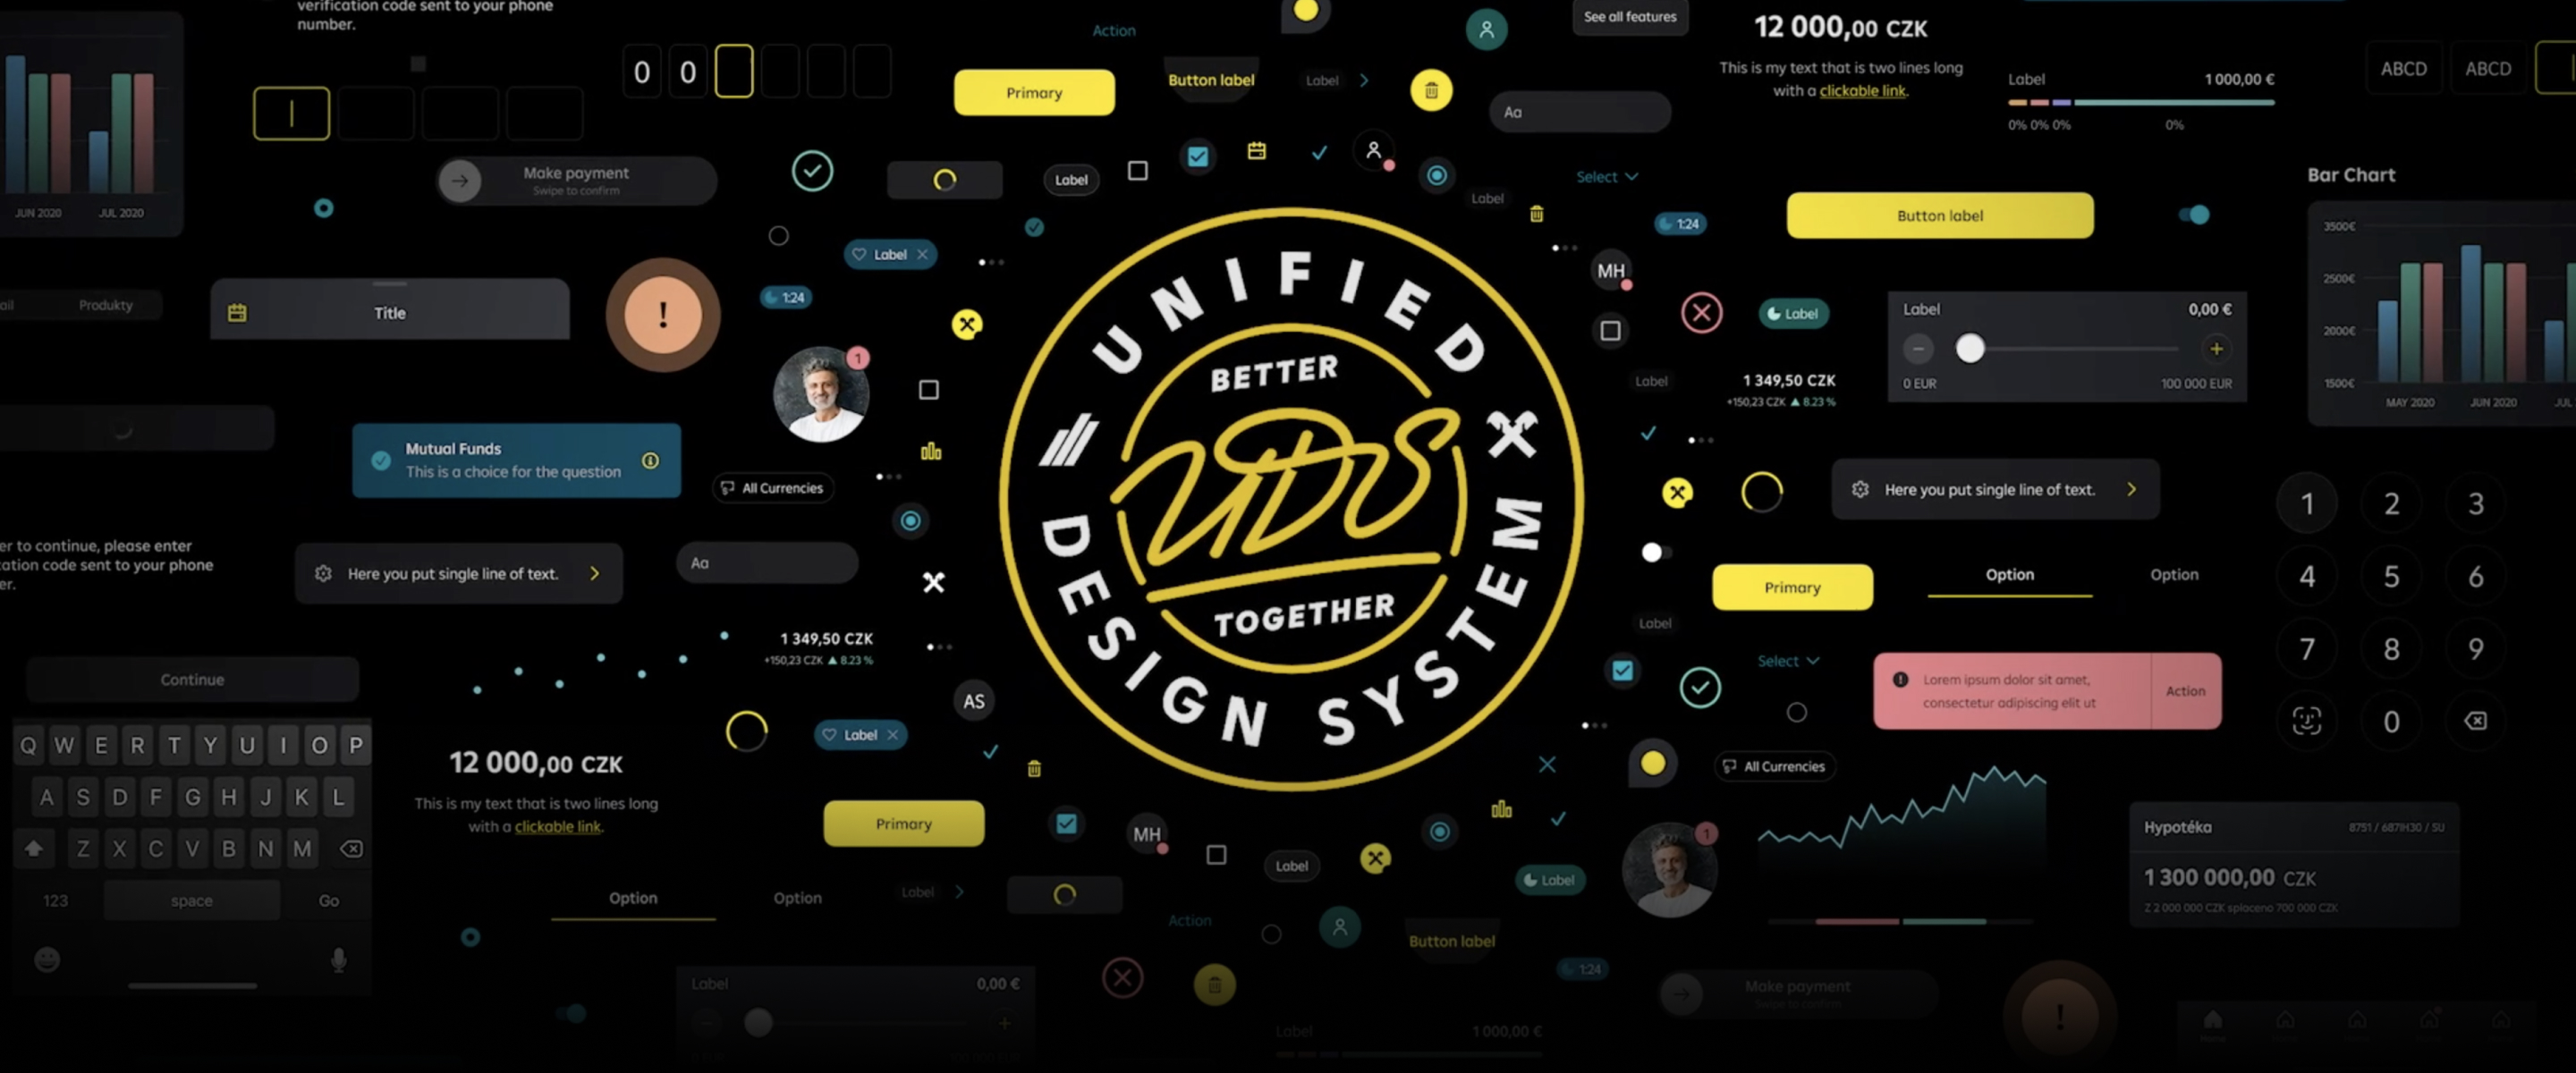 Image with UI components and UDS logo in the center